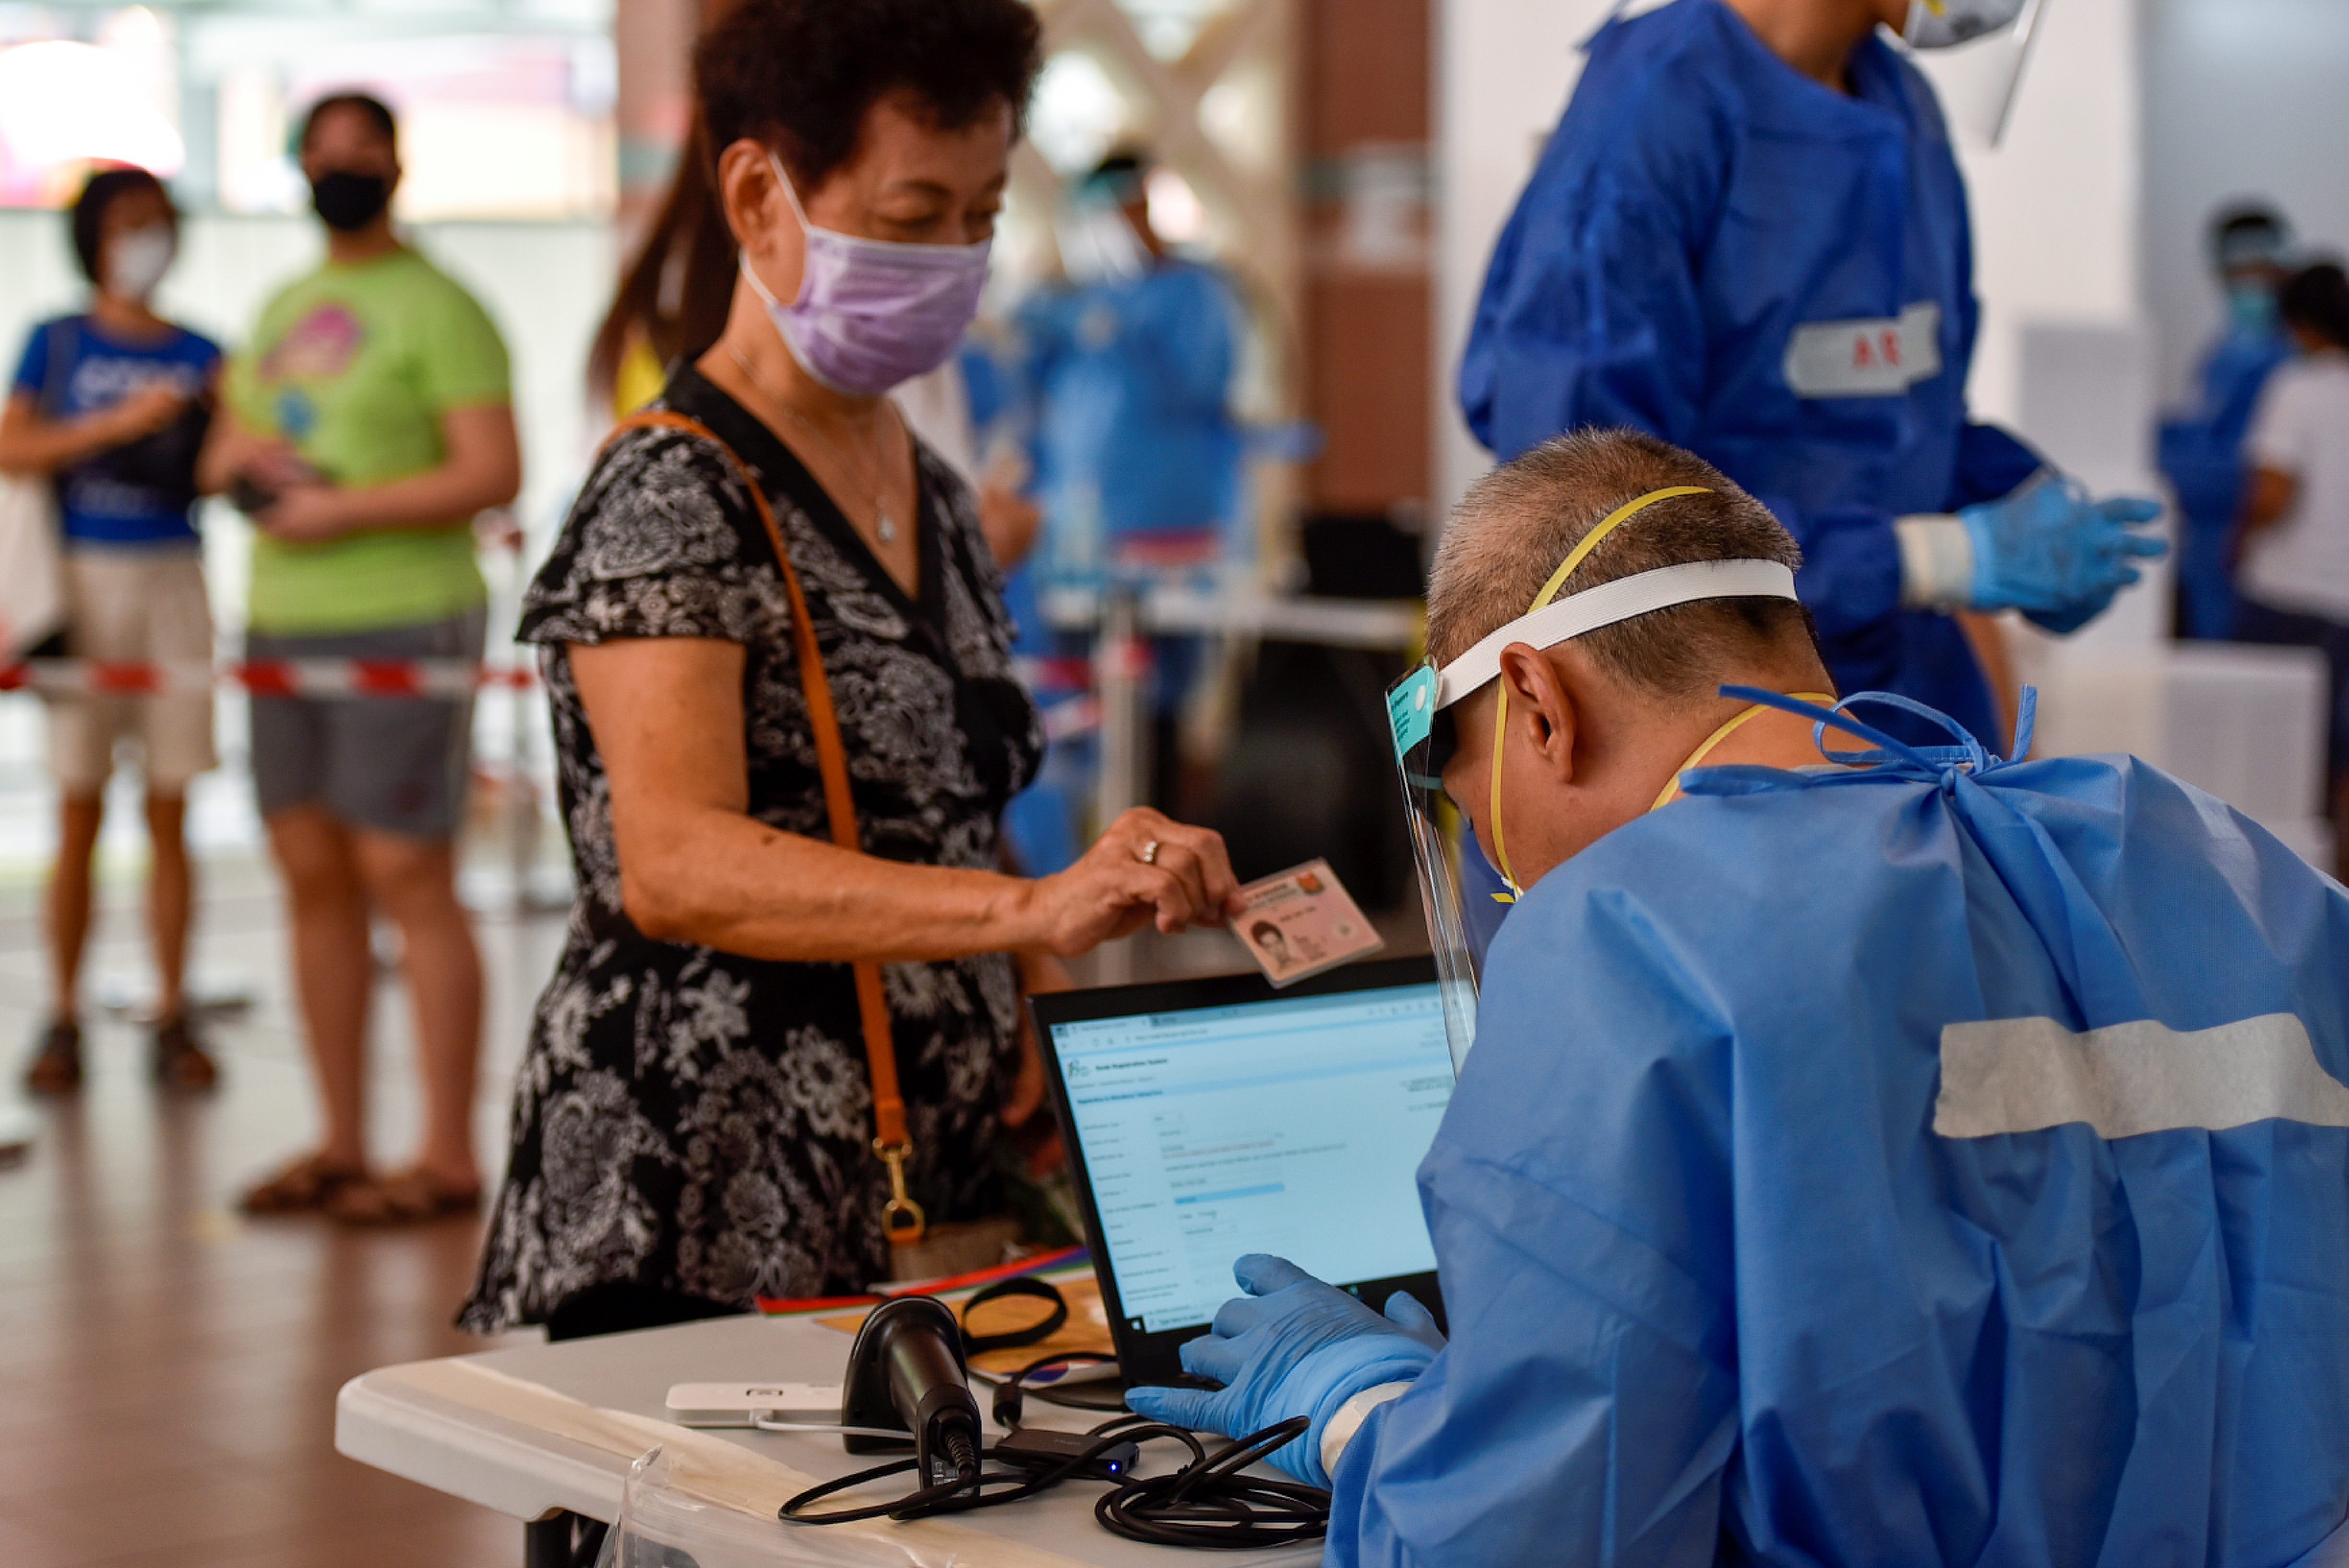 Swab tests are conducted at a public housing estate after a nearby food centre became a COVID-19 cluster in Singapore